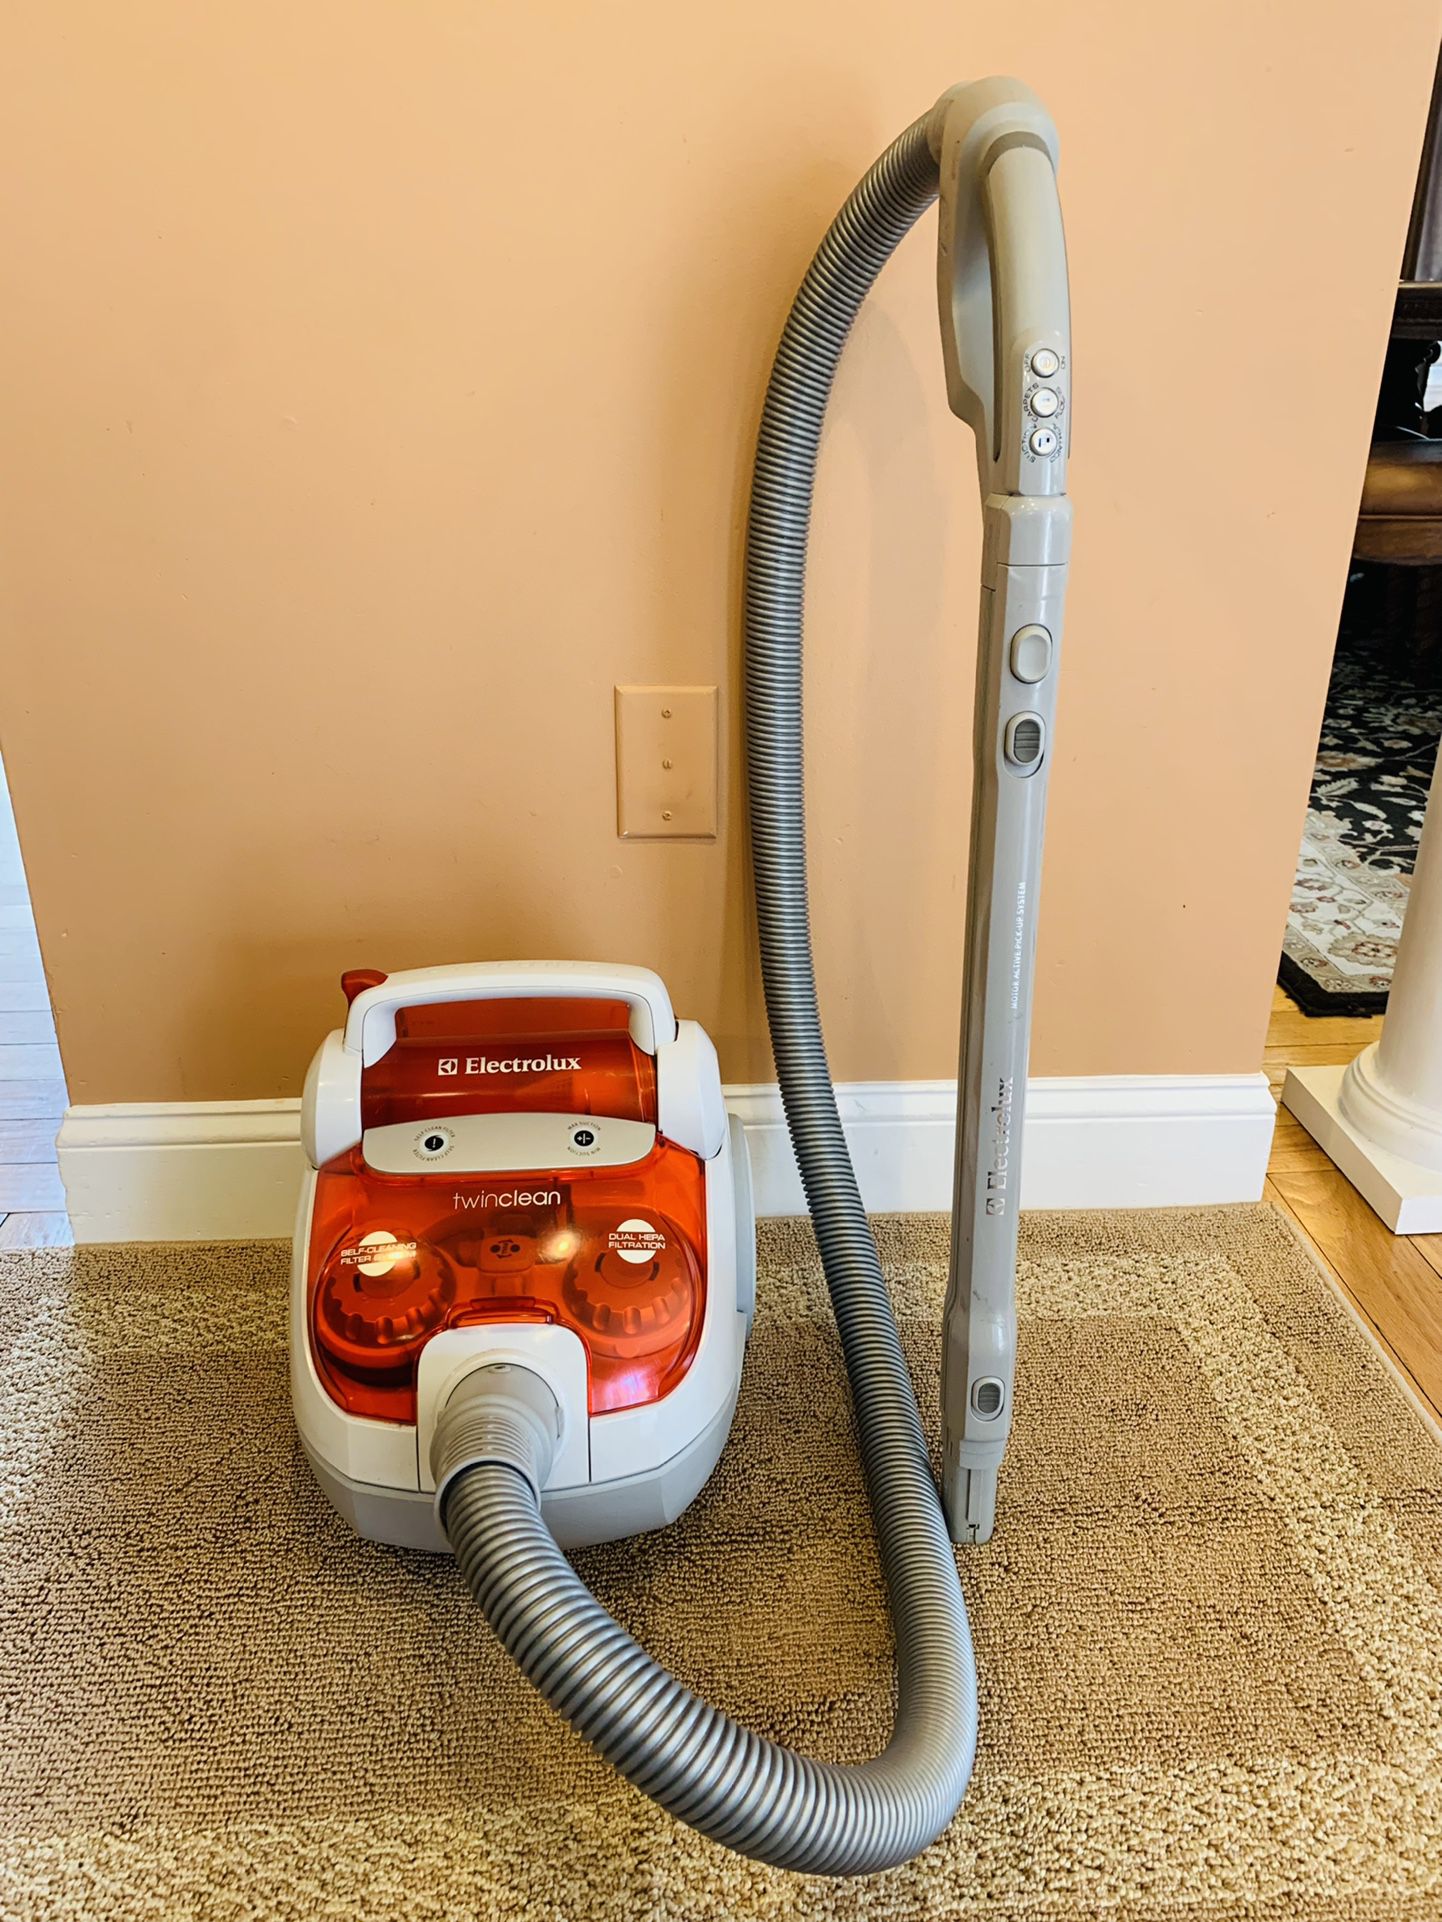 Electrolux twin clean Bagless Vacuum Cleaner